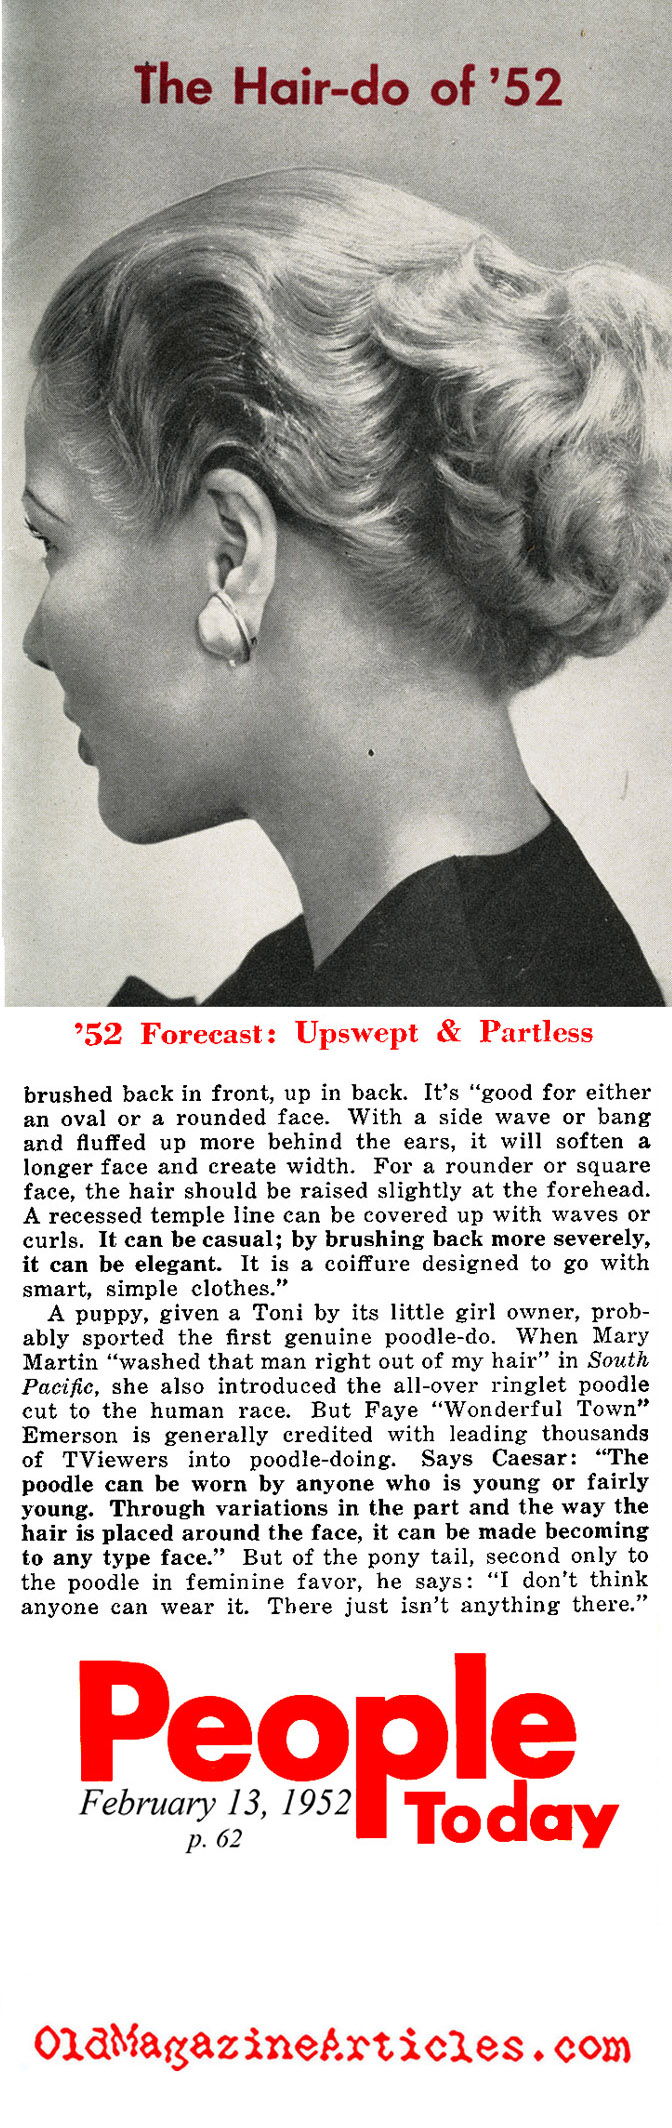 Hair Fashions of the Early 1950s (People Today, 1952)